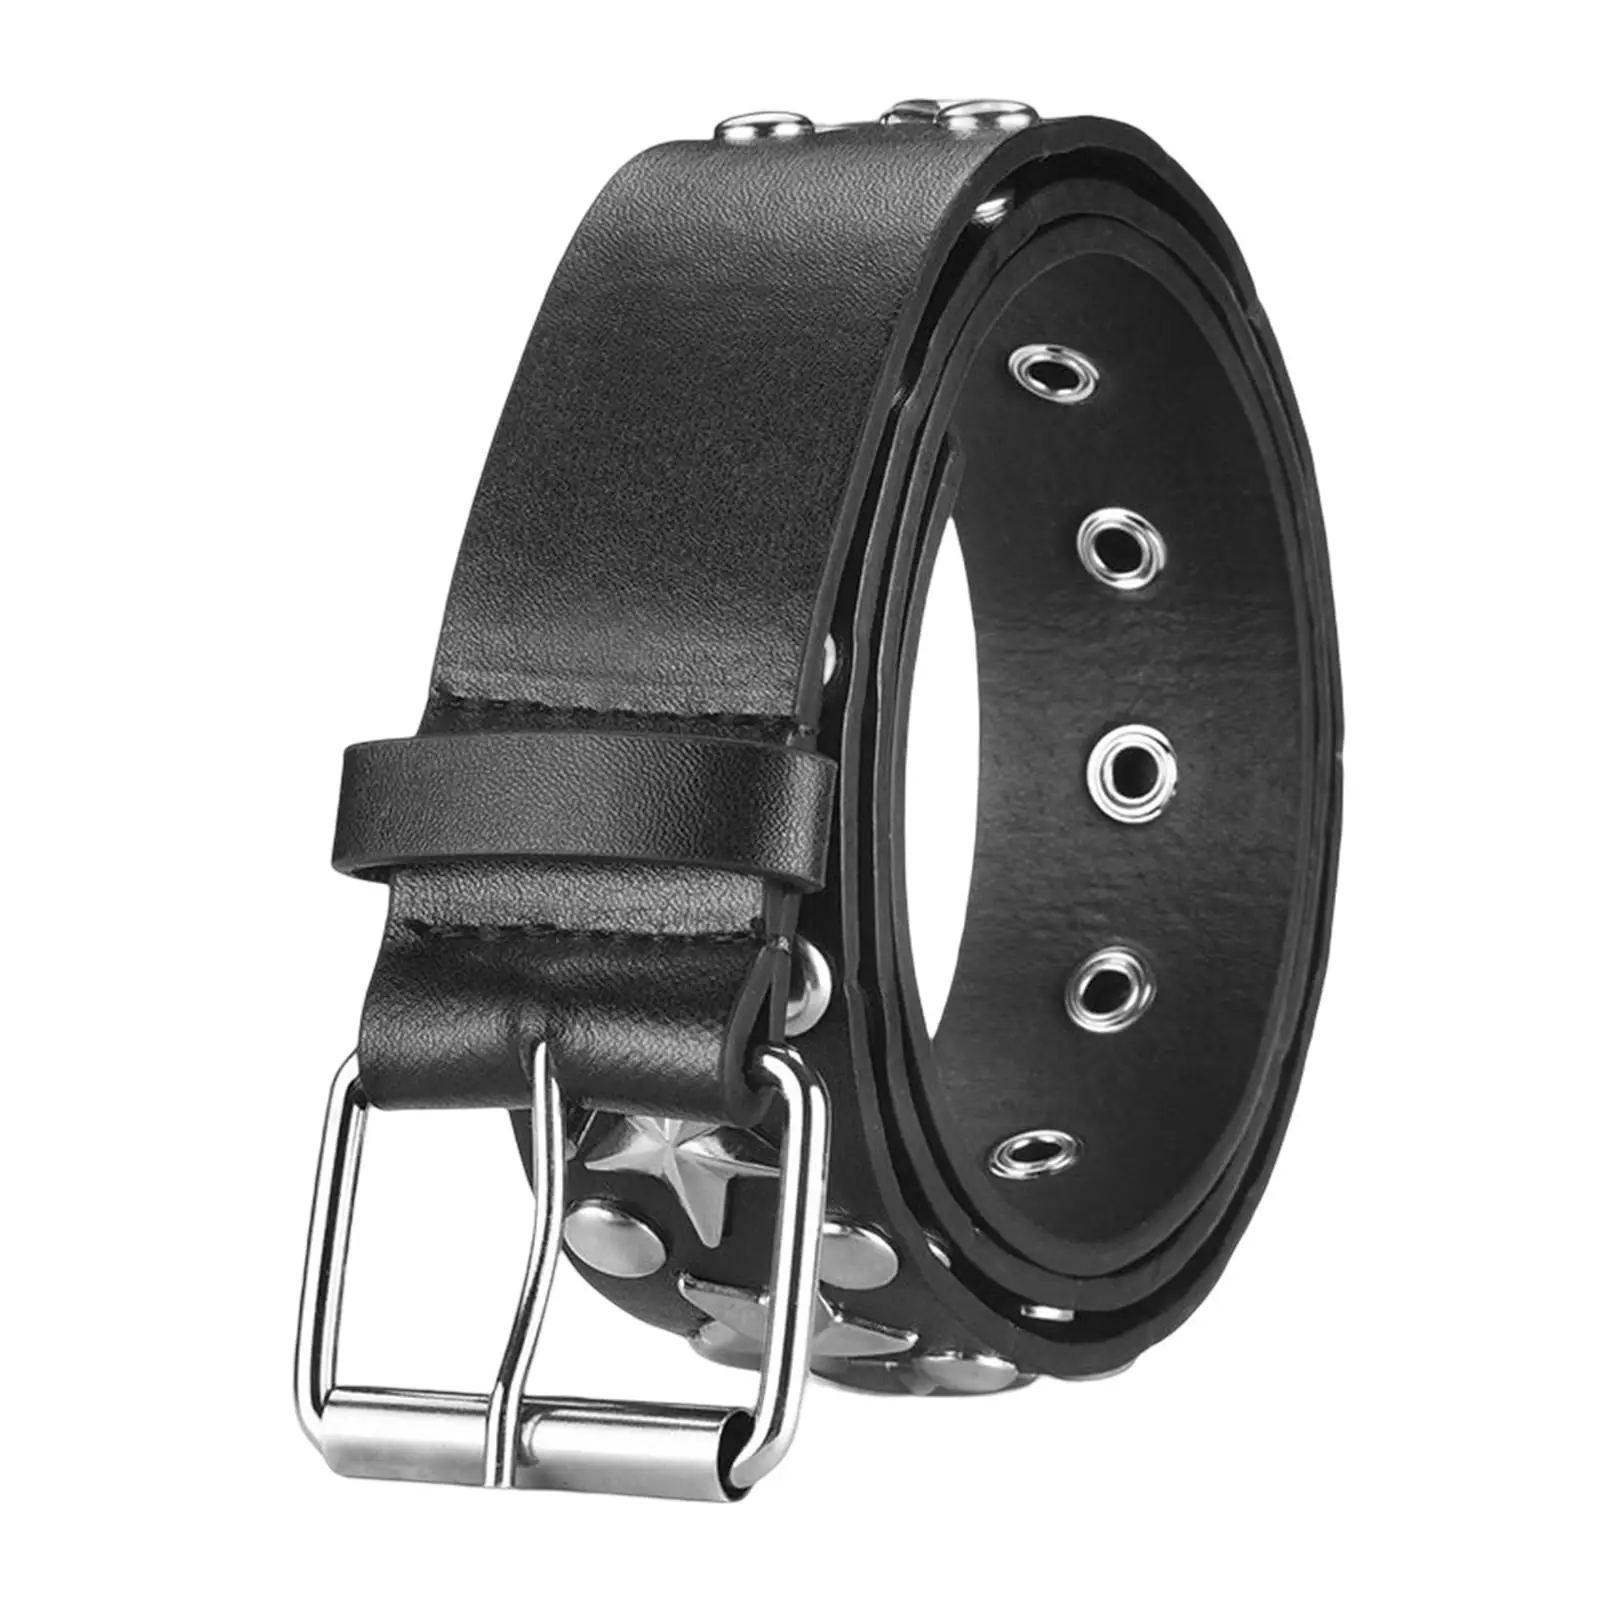 Women Belt Waist Belt Casual Single Eyelet Waistband Pin Buckle Female Adjustable PU Leather for Jeans Dress Dancing Club Party